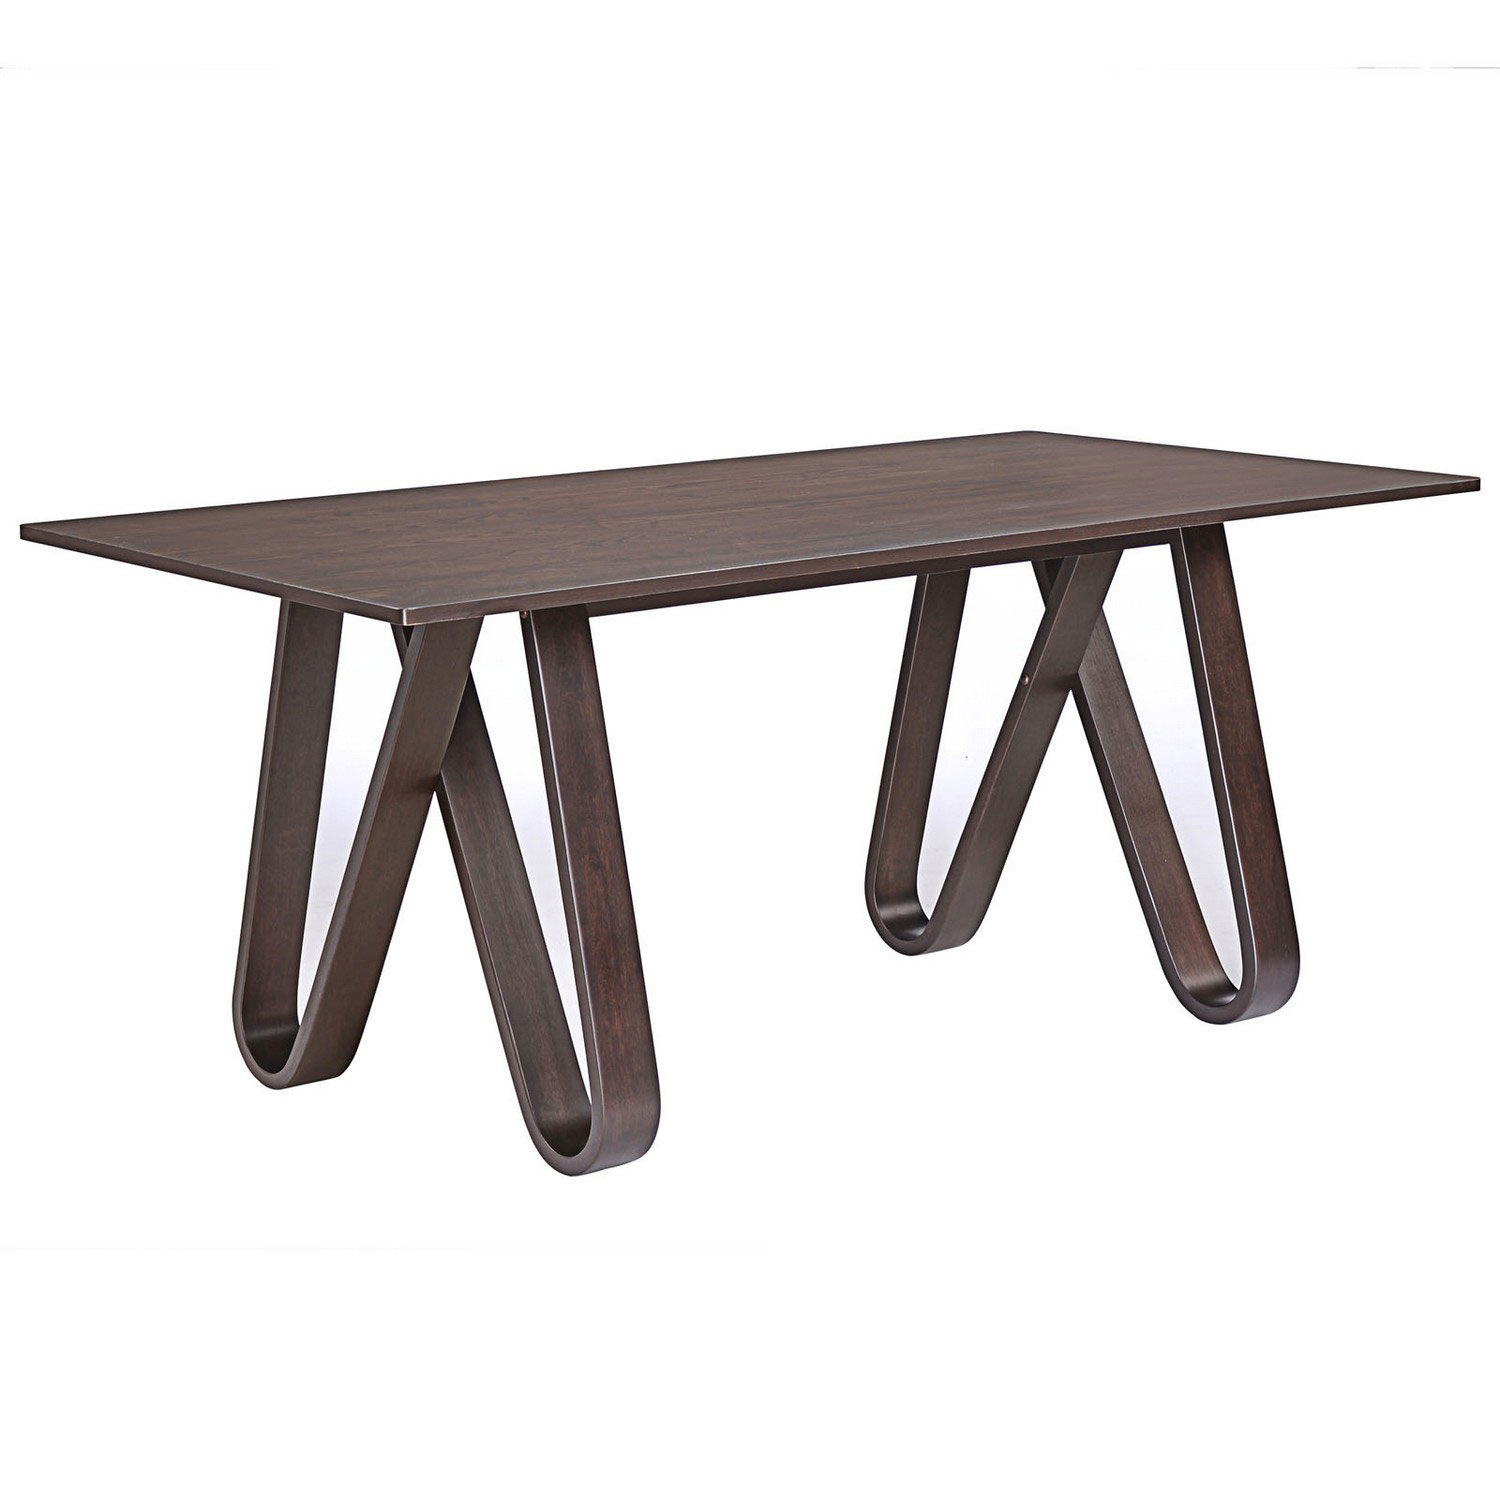 Modway Cision Dining Table - Walnut